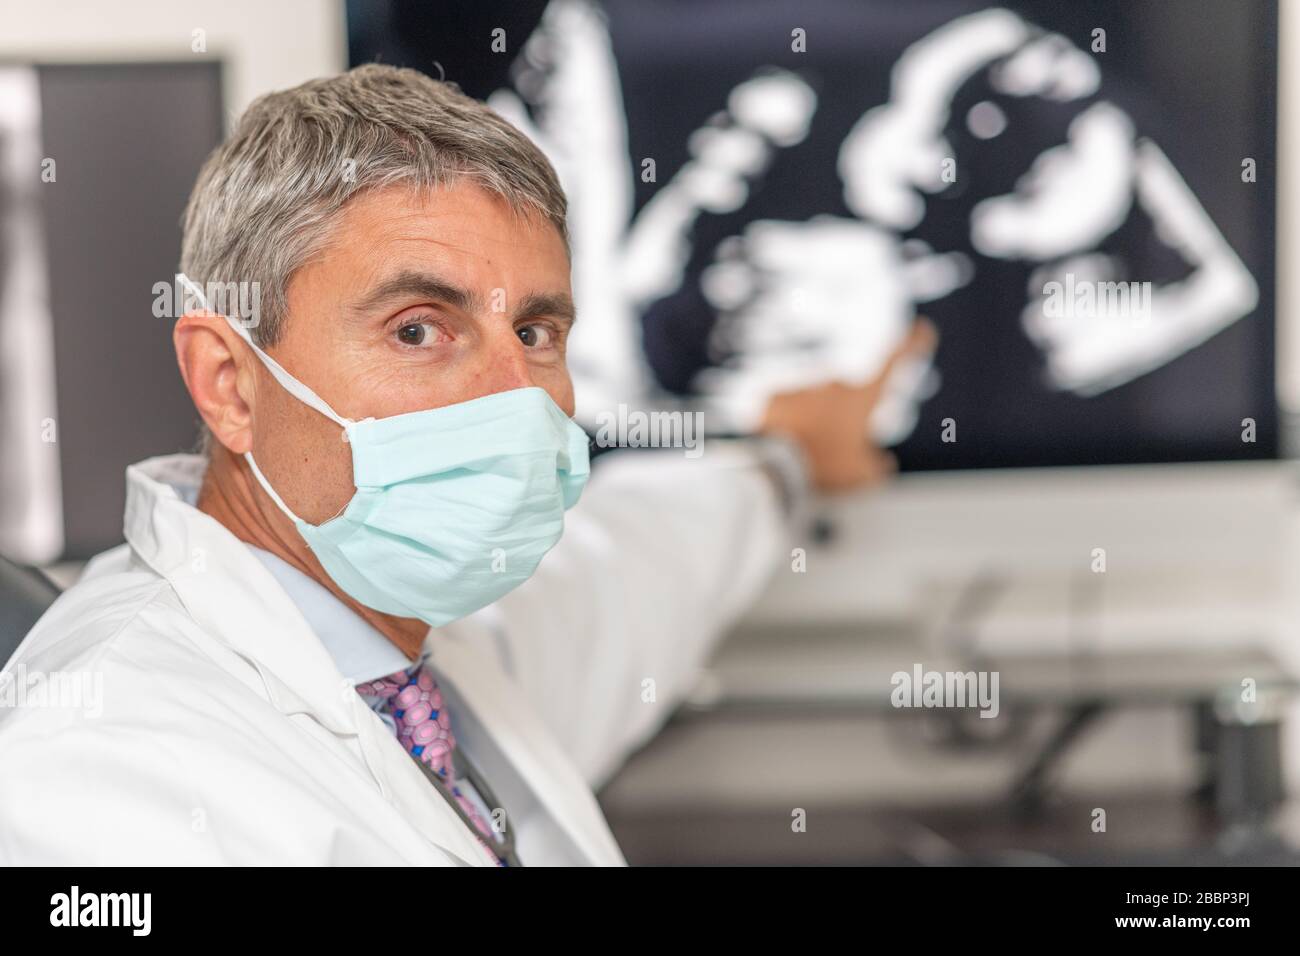 Male Doctor Wearing Mask Analyzing Scientific Data Looking at Display in a Modern Laboratory. Ultrasound of fetus at coronavirus times. Stock Photo